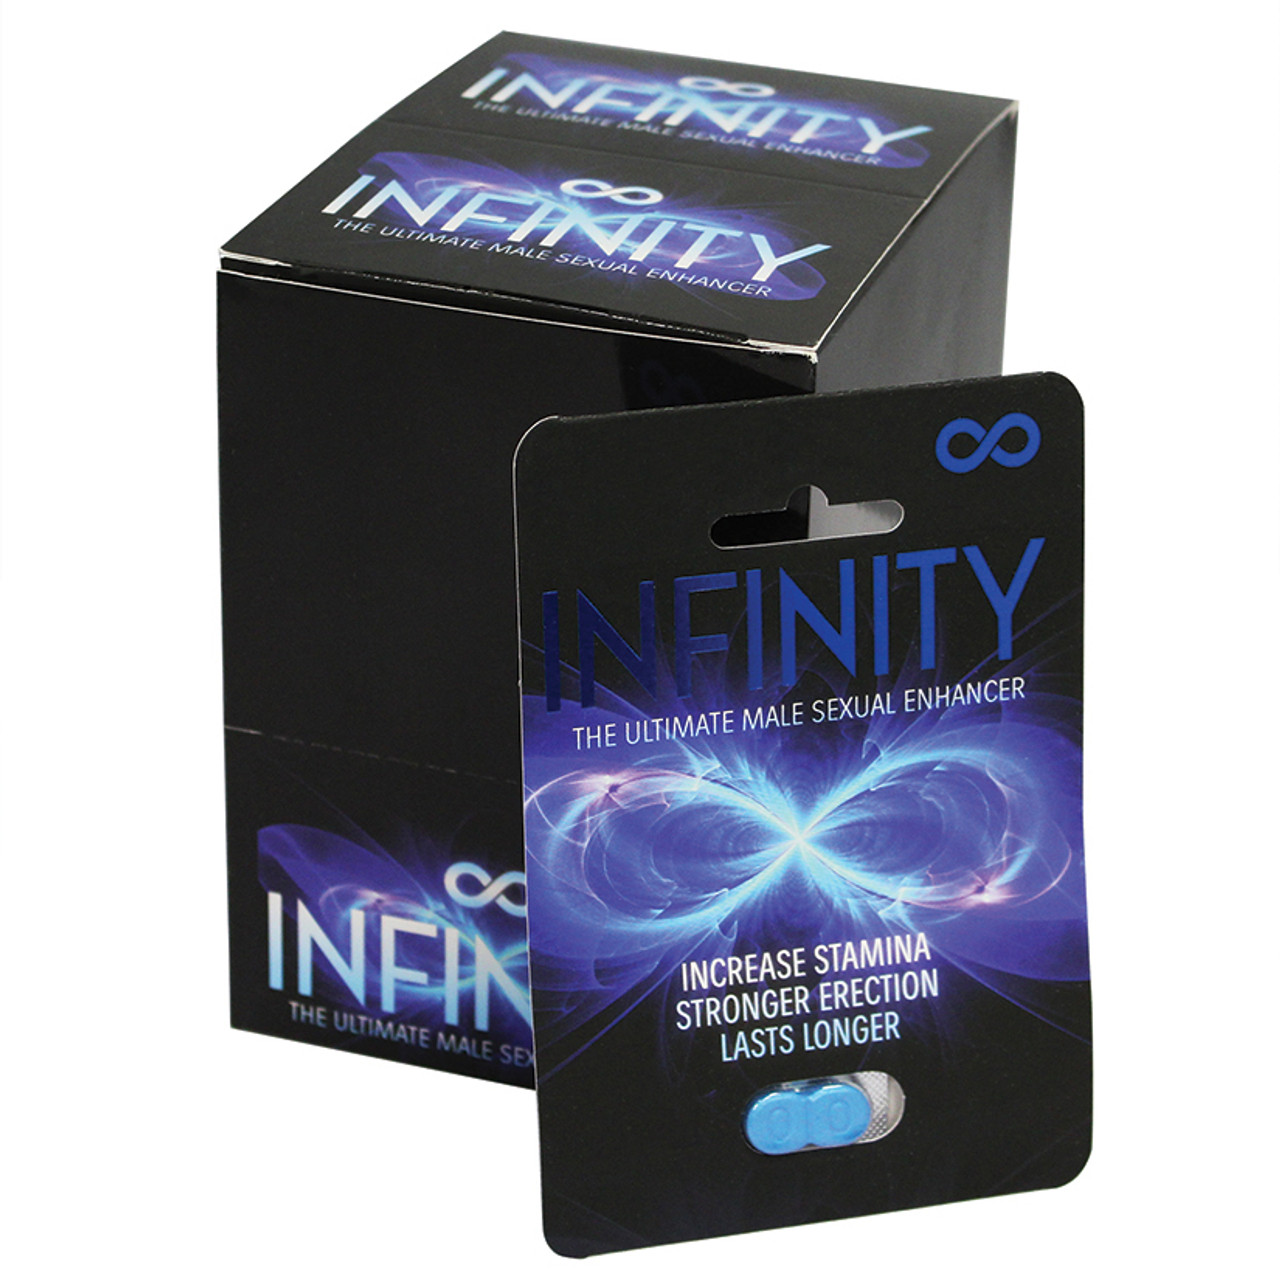 Infinty Male Enhancement Single Pack Display of 30